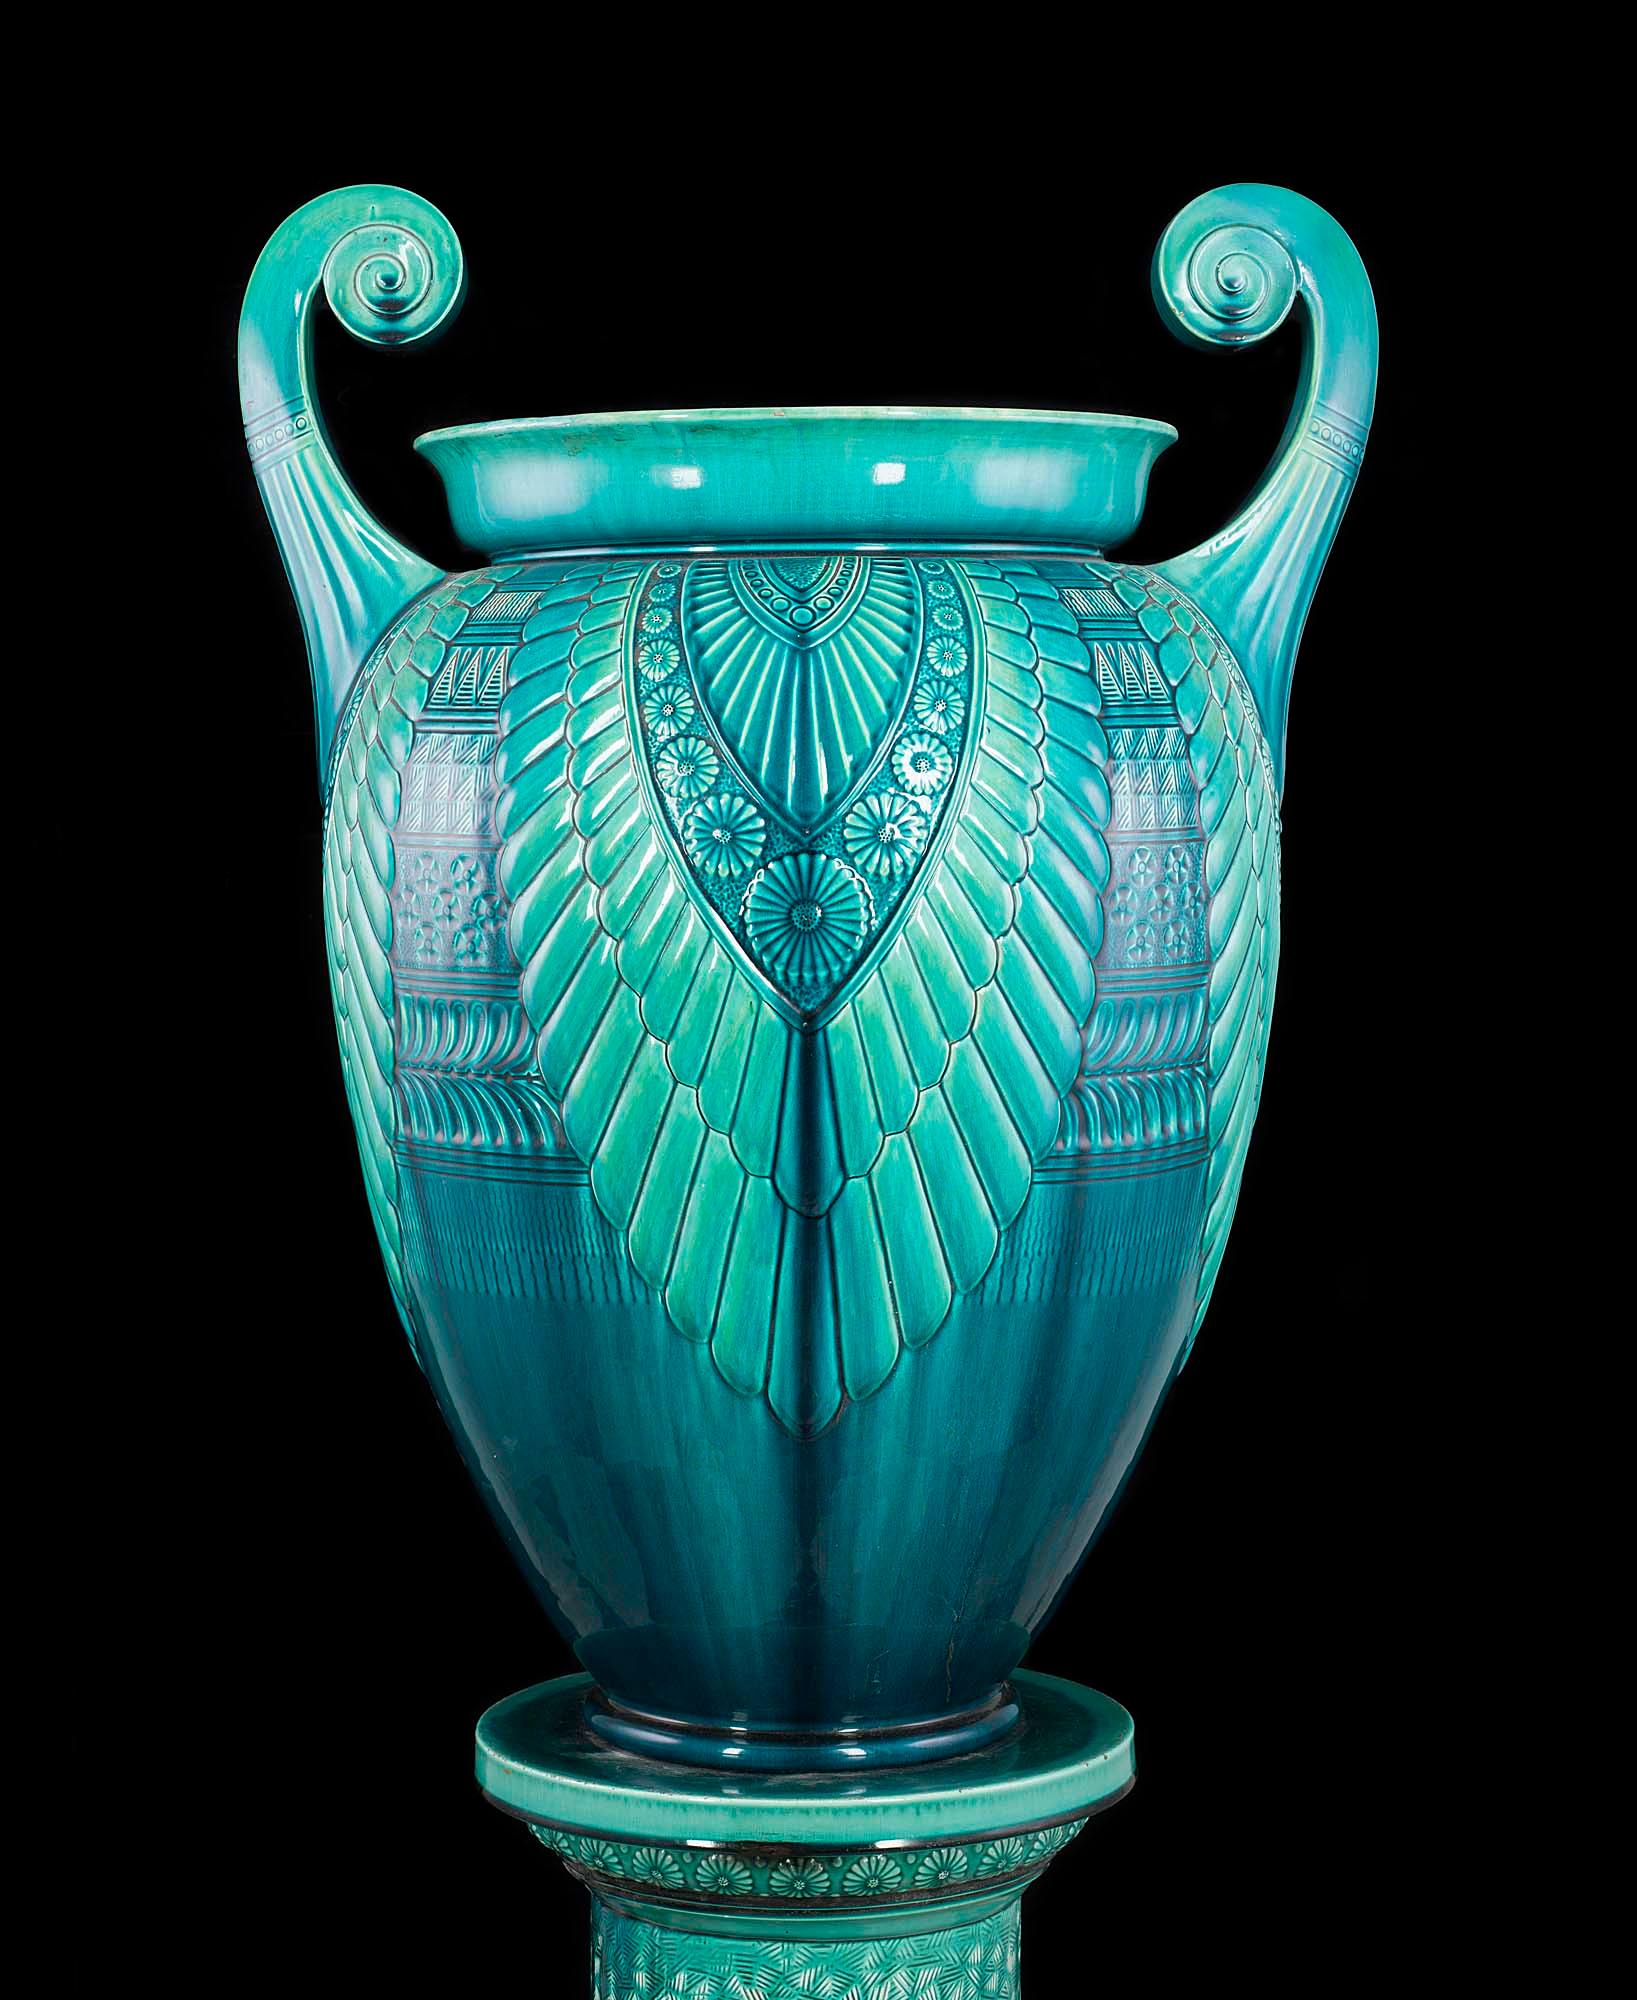 19th Century Glazed Turquoise Ceramic Jardinière and Stand Designed by Christopher Dresser